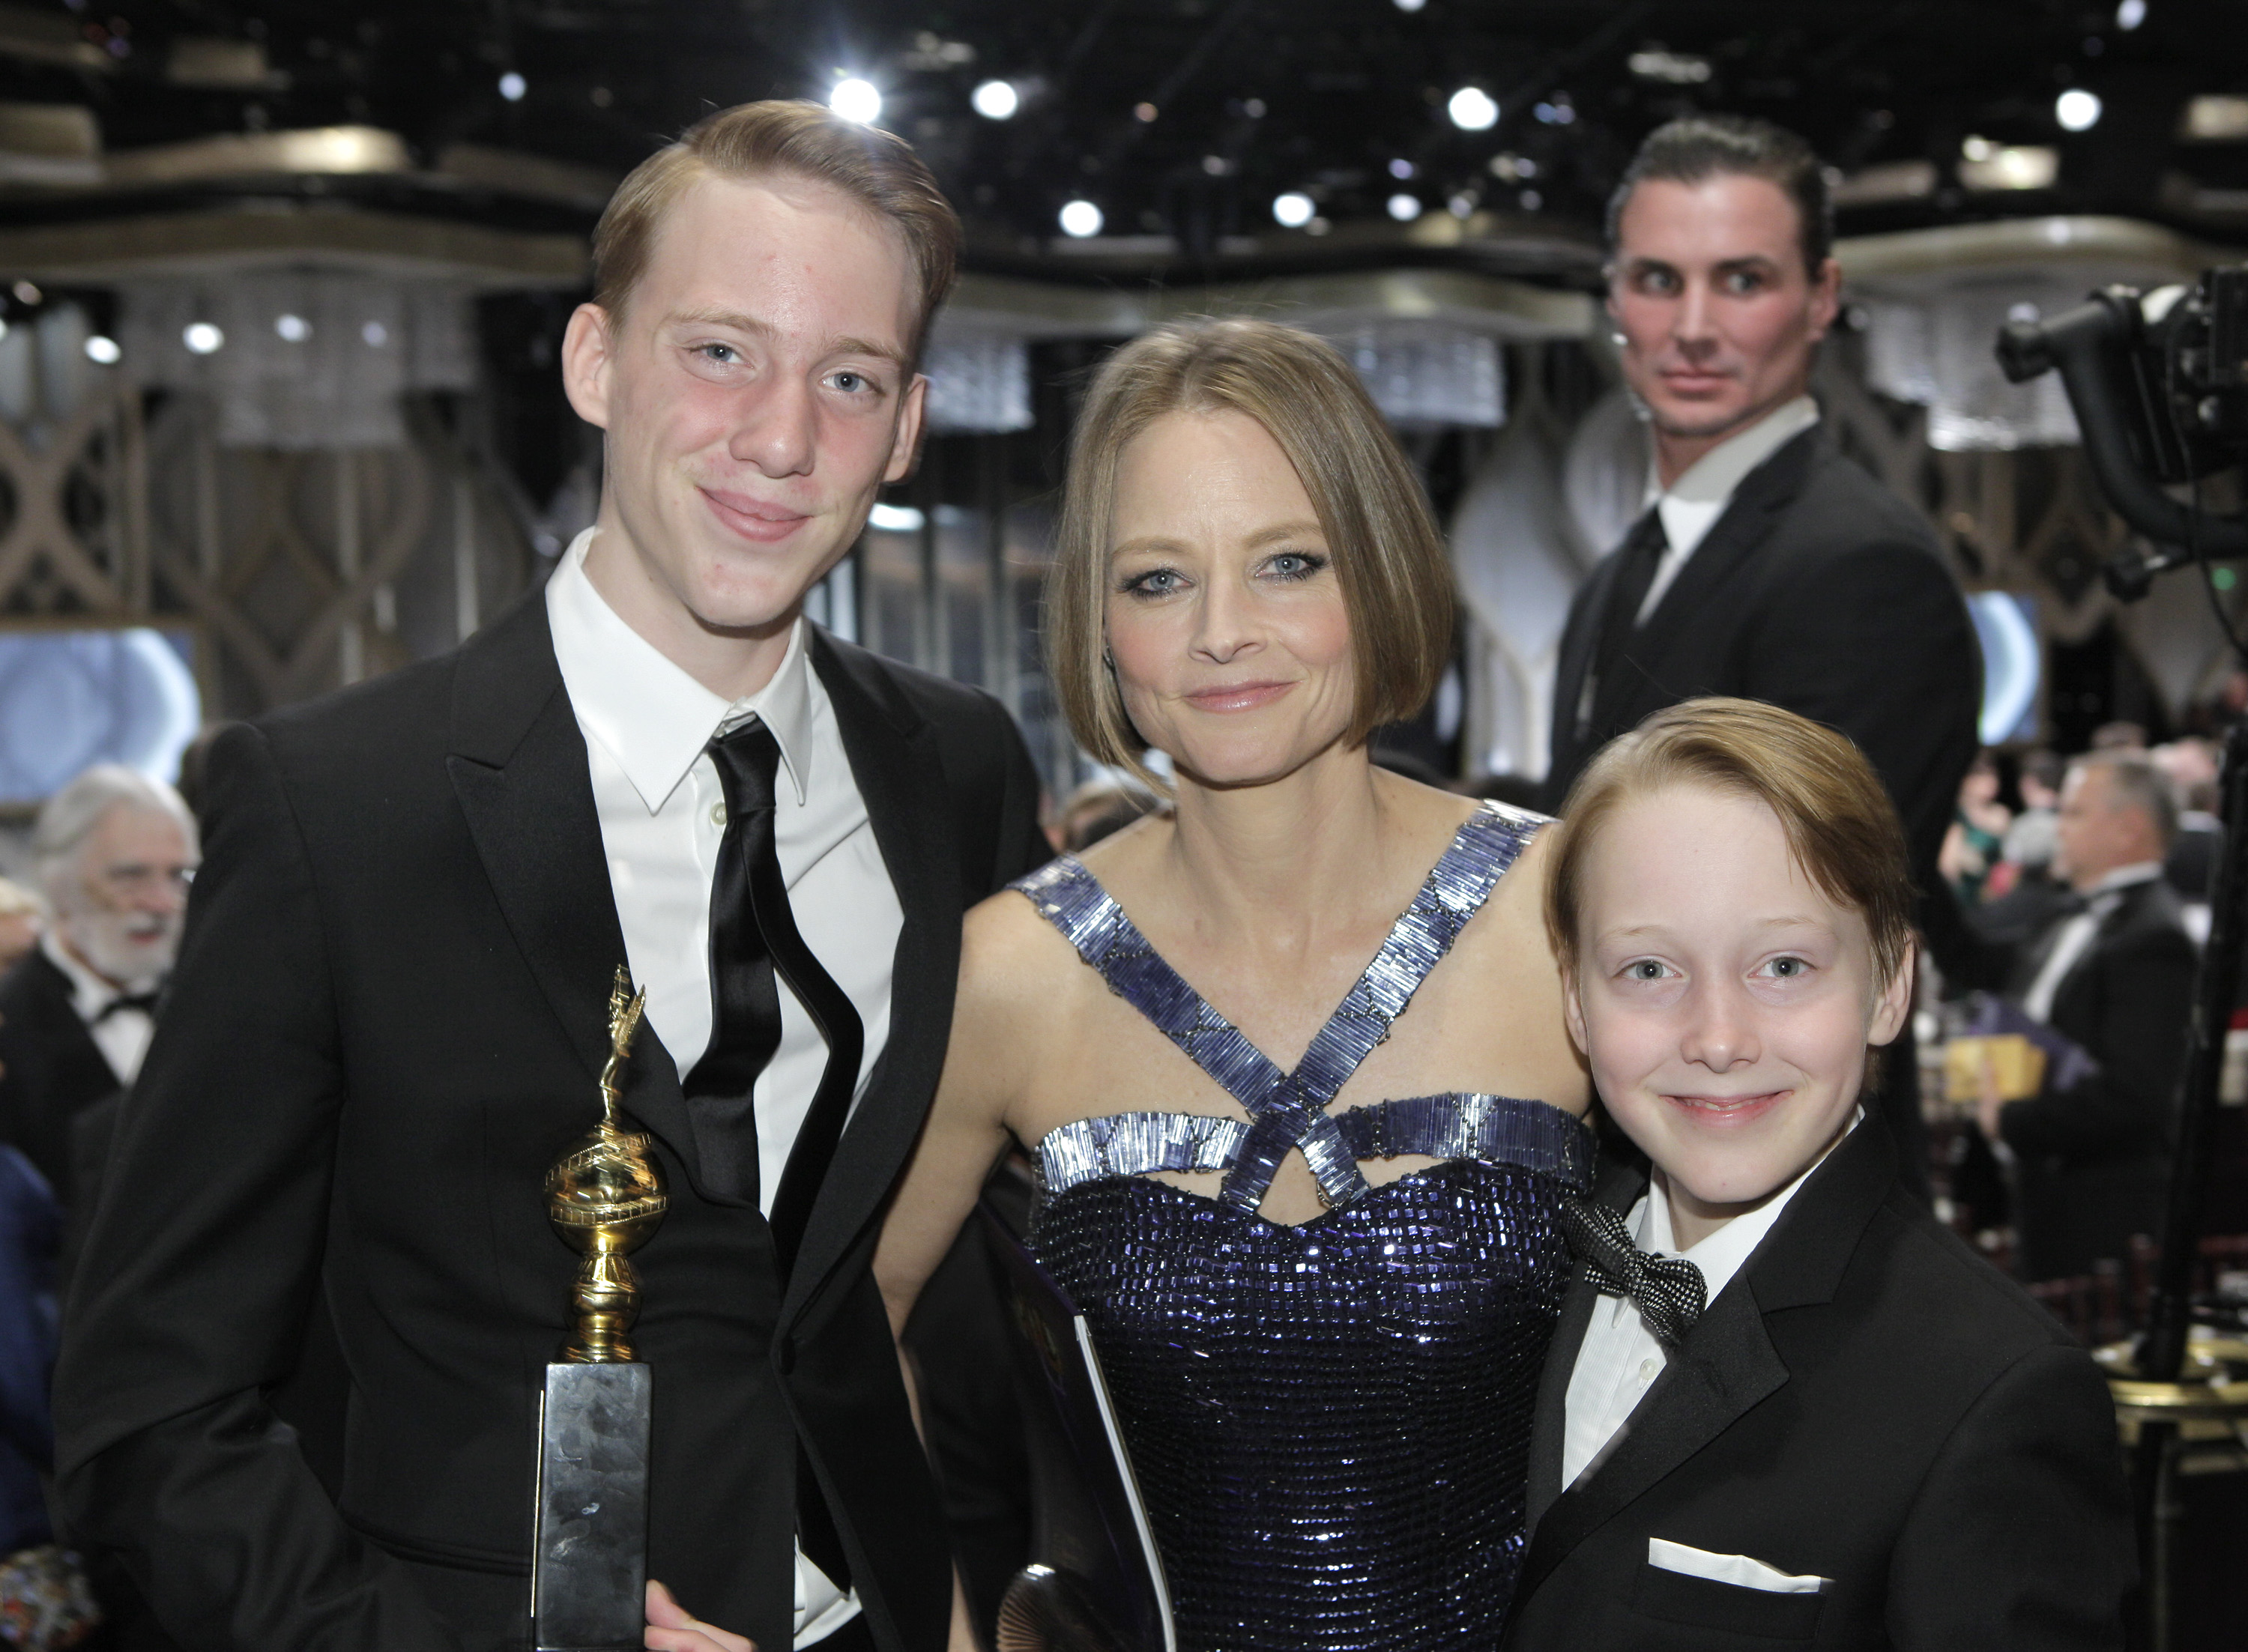 Jodie Foster with her sons Charles and Kit at the 70th Annual Golden Globe Awards at the Beverly Hilton Hotel on January 13, 2013 | Source: Getty Images